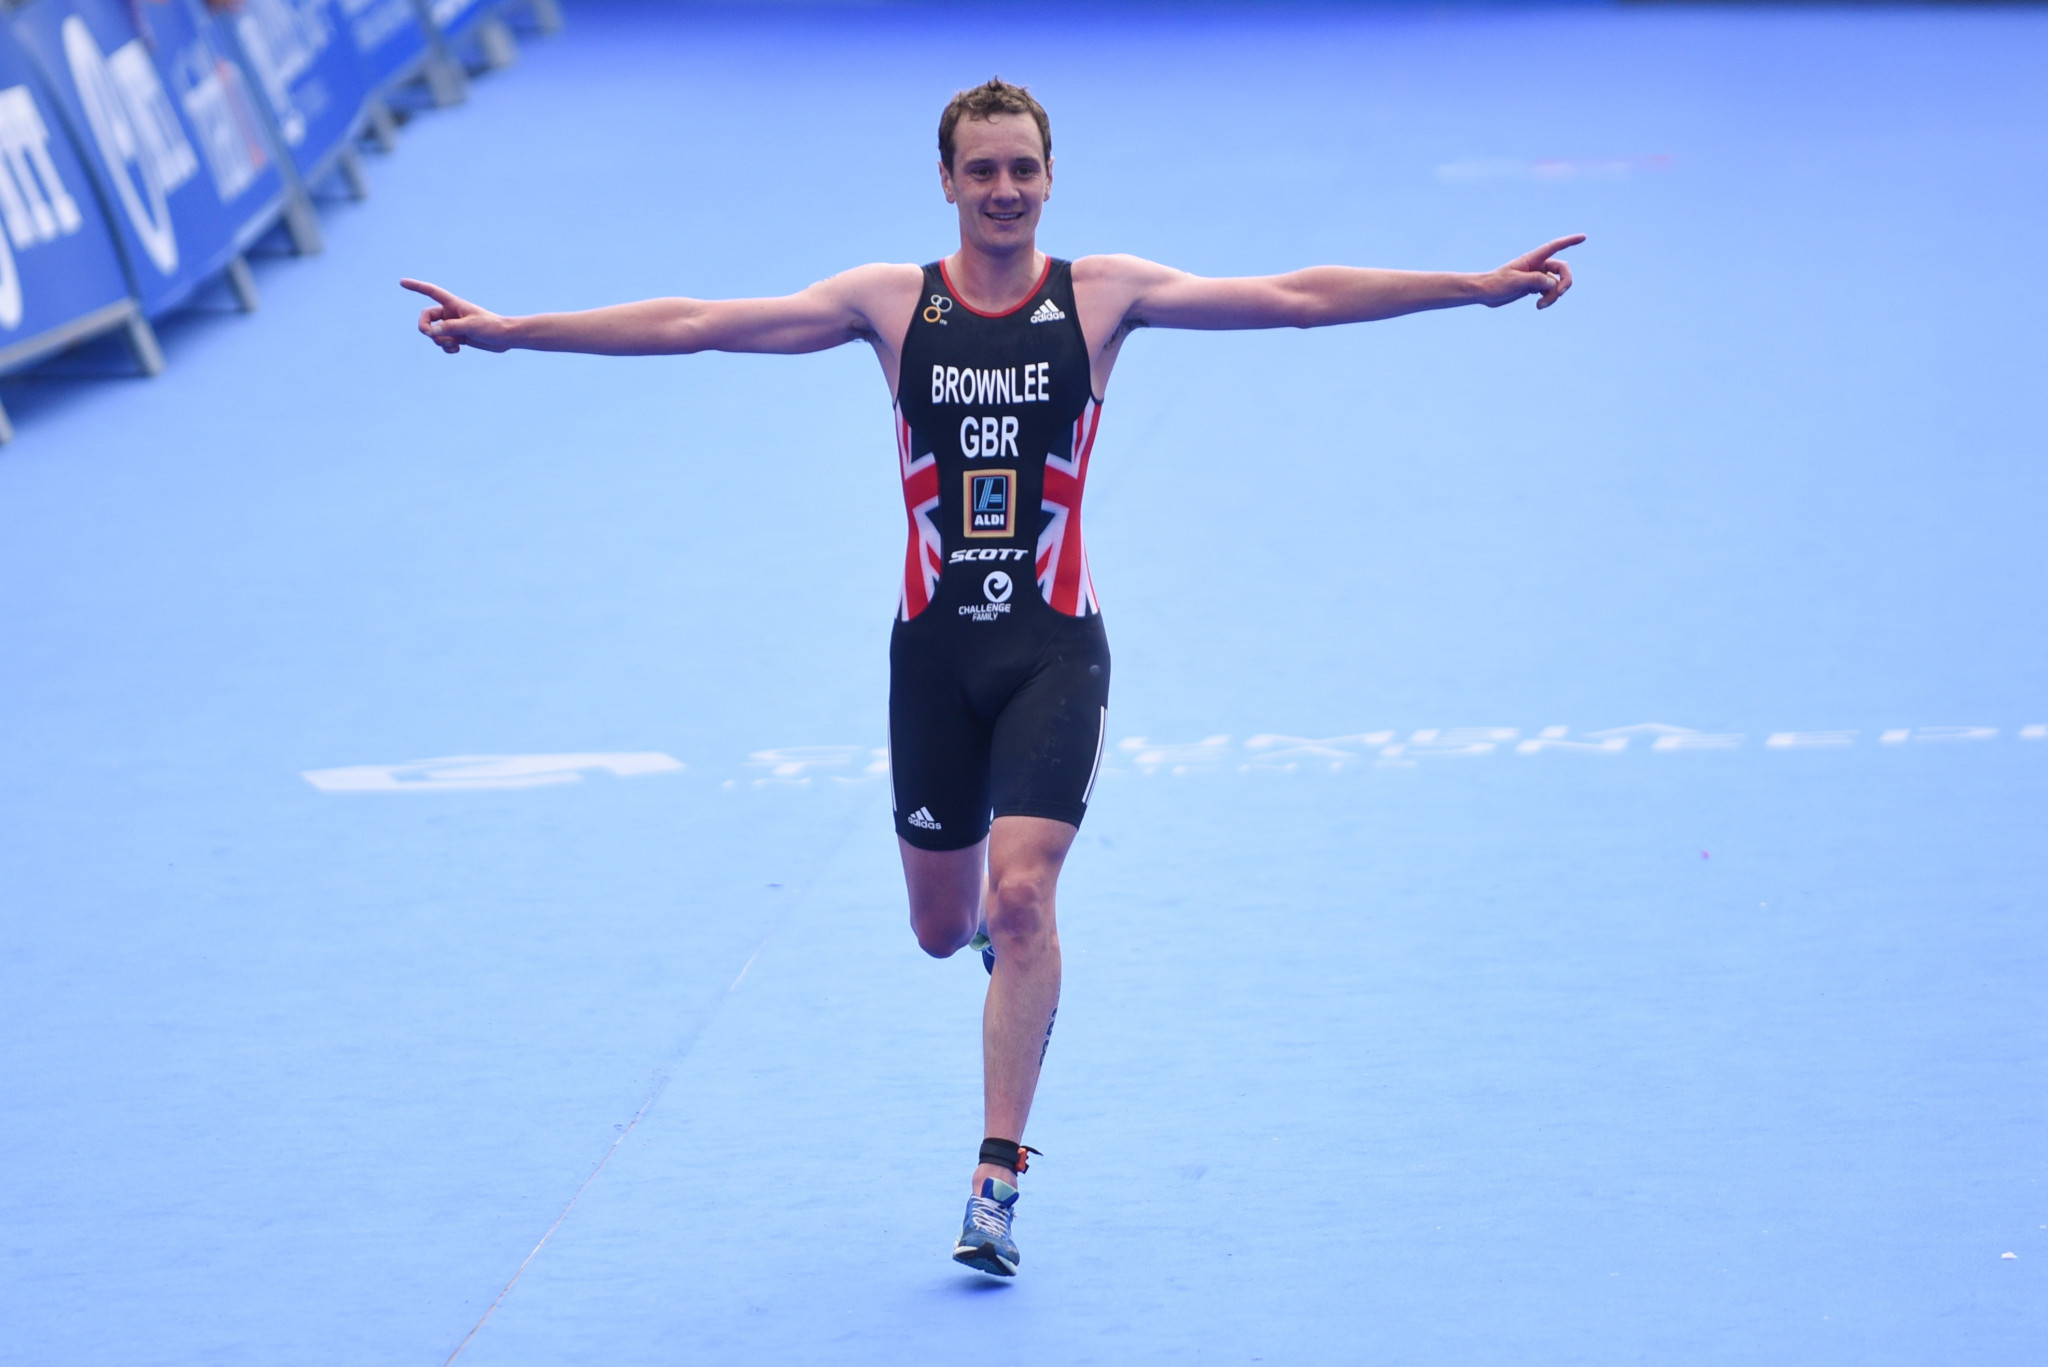 Brownlee to defend Commonwealth Games title after named on English triathlon team for Gold Coast 2018